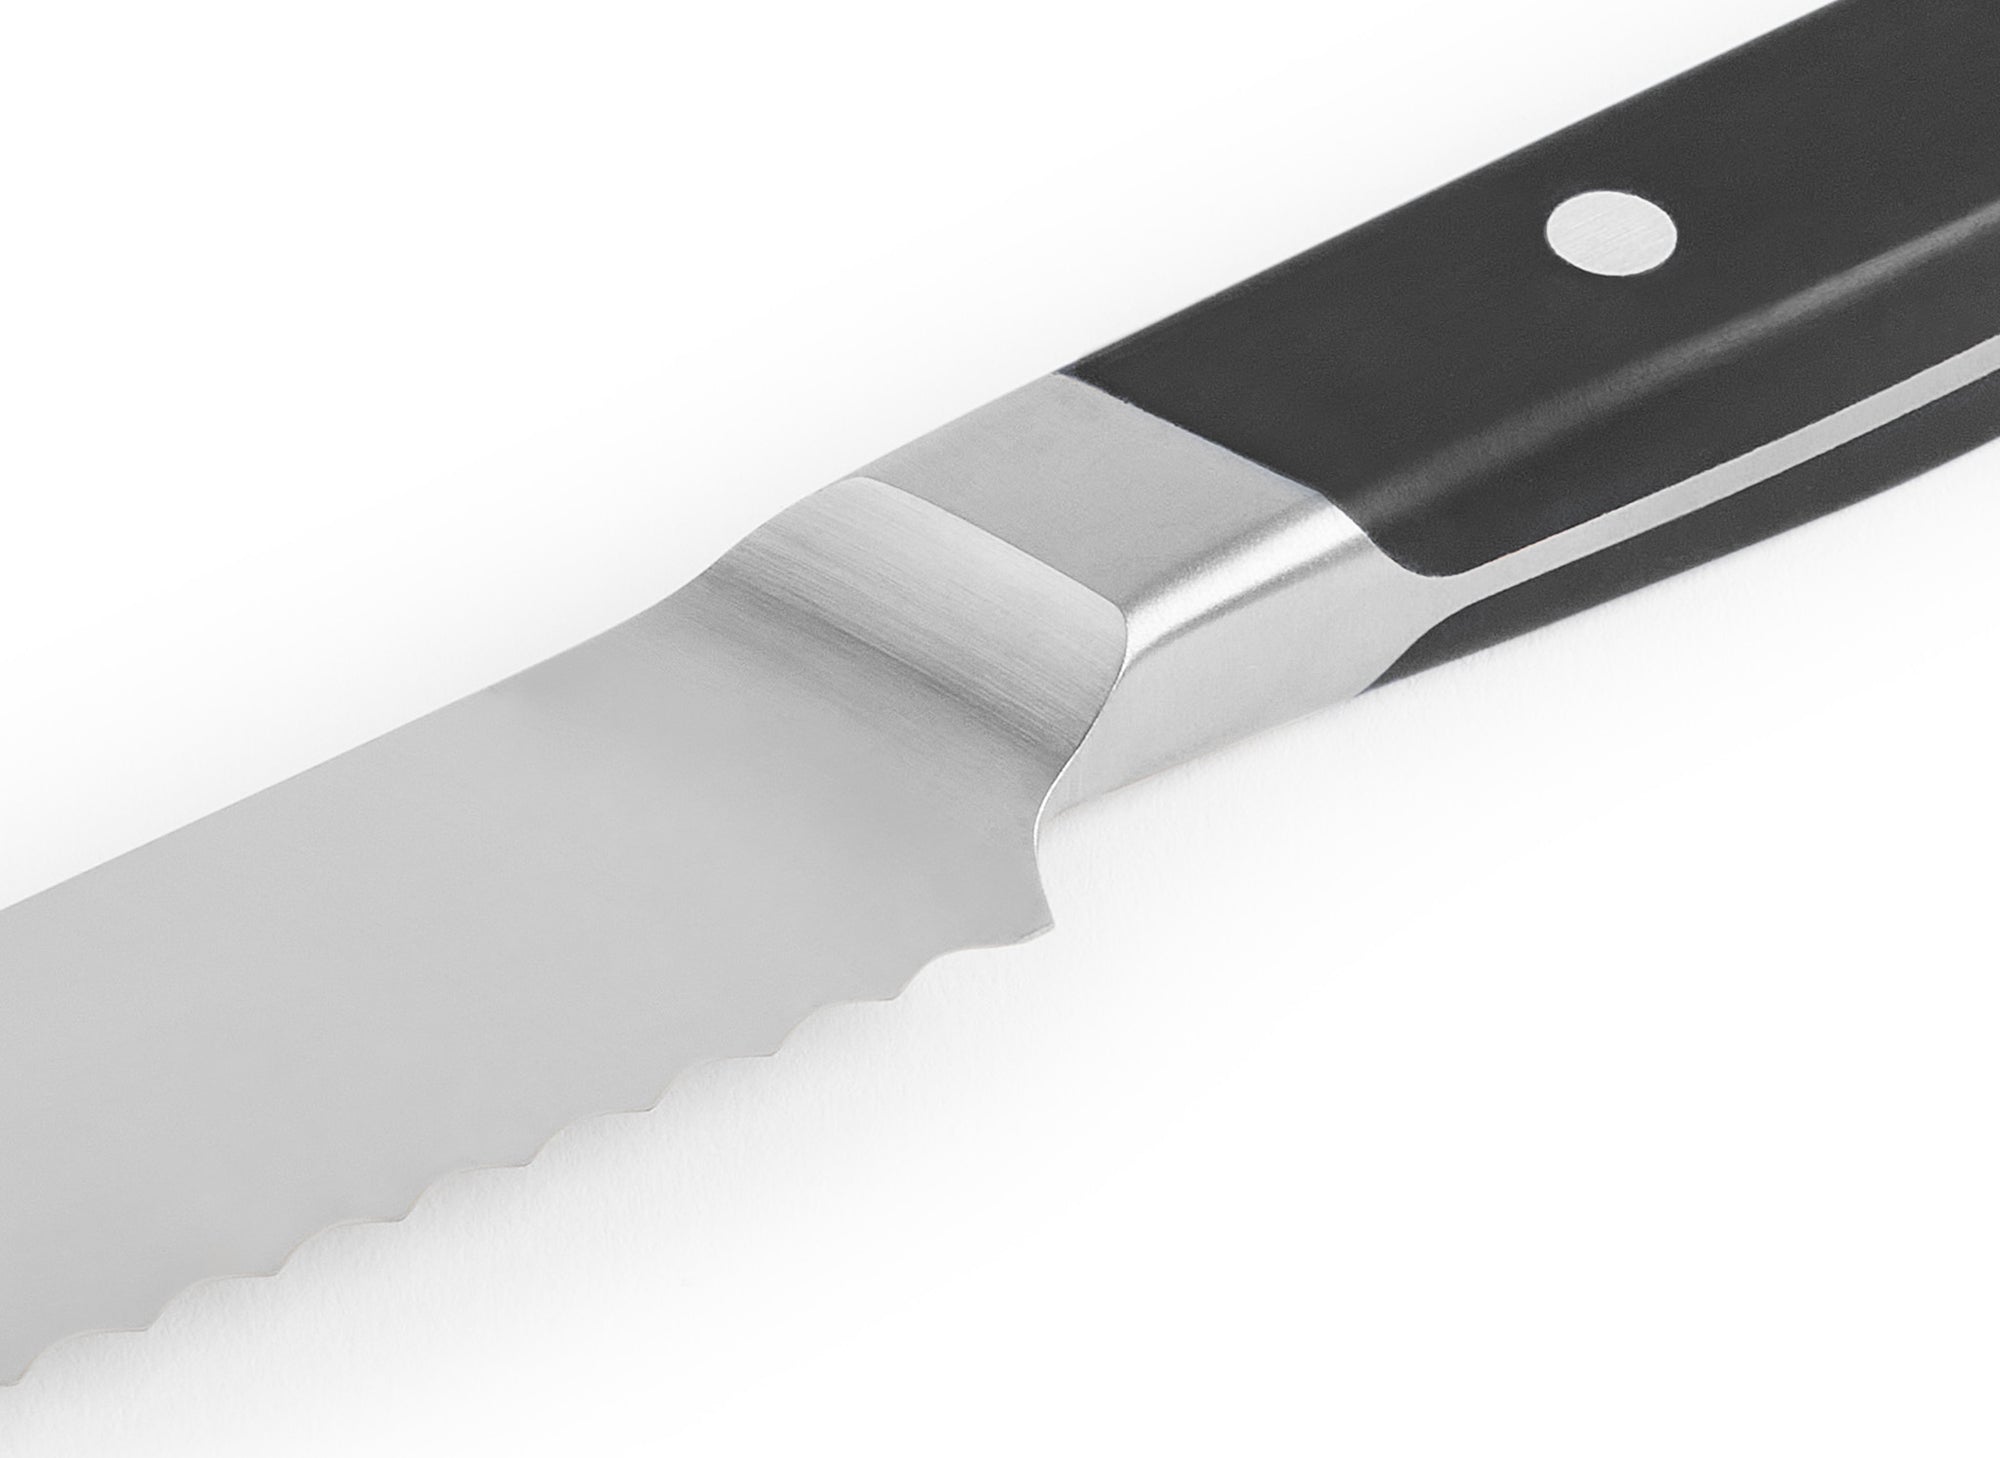 A close-up shot of the black Misen Short Serrated Knife on a white background, with a clear view of the blade serrations and sloped bolster.